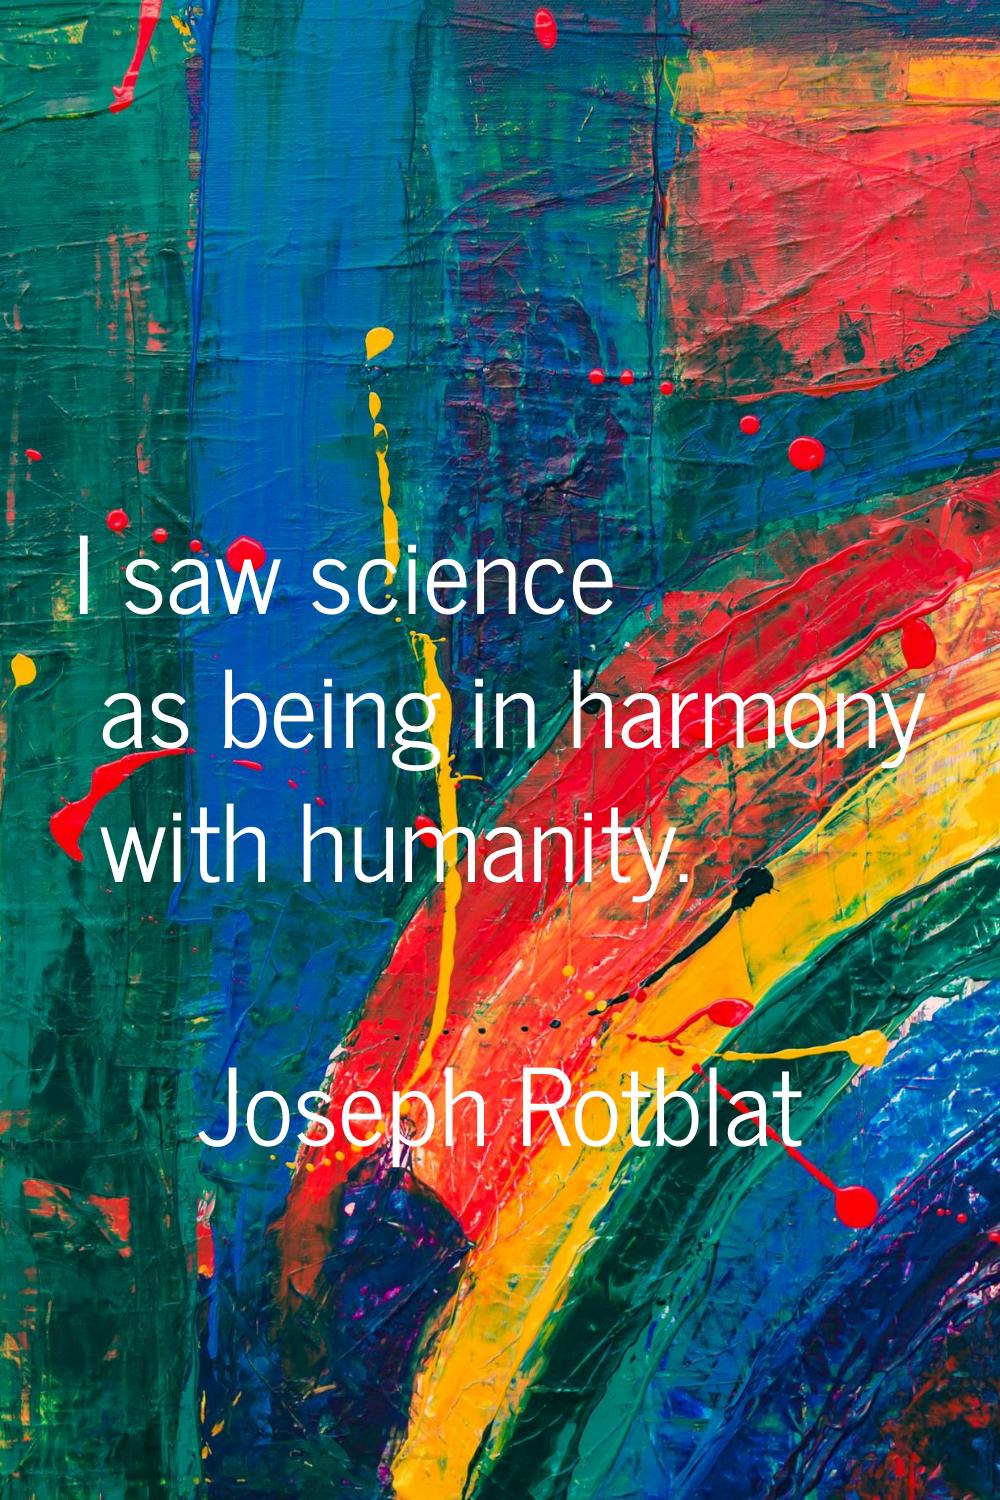 I saw science as being in harmony with humanity.